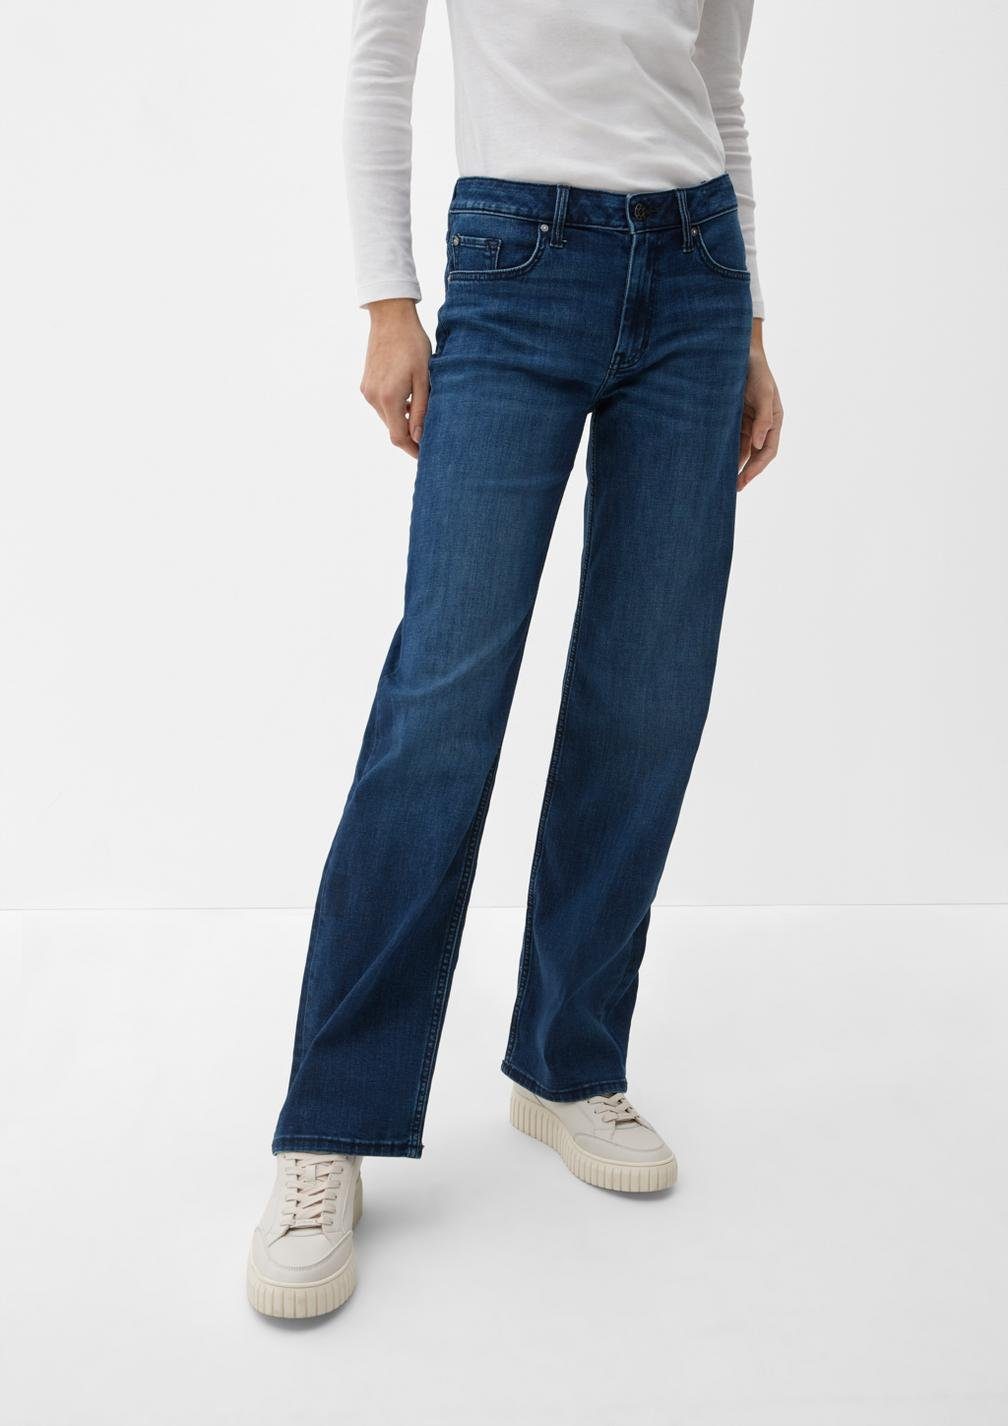 s.Oliver Comfort-fit-Jeans KAROLIN mit leichter Waschung, Relaxed Fit / Mid rise / Straight Leg tiefblau